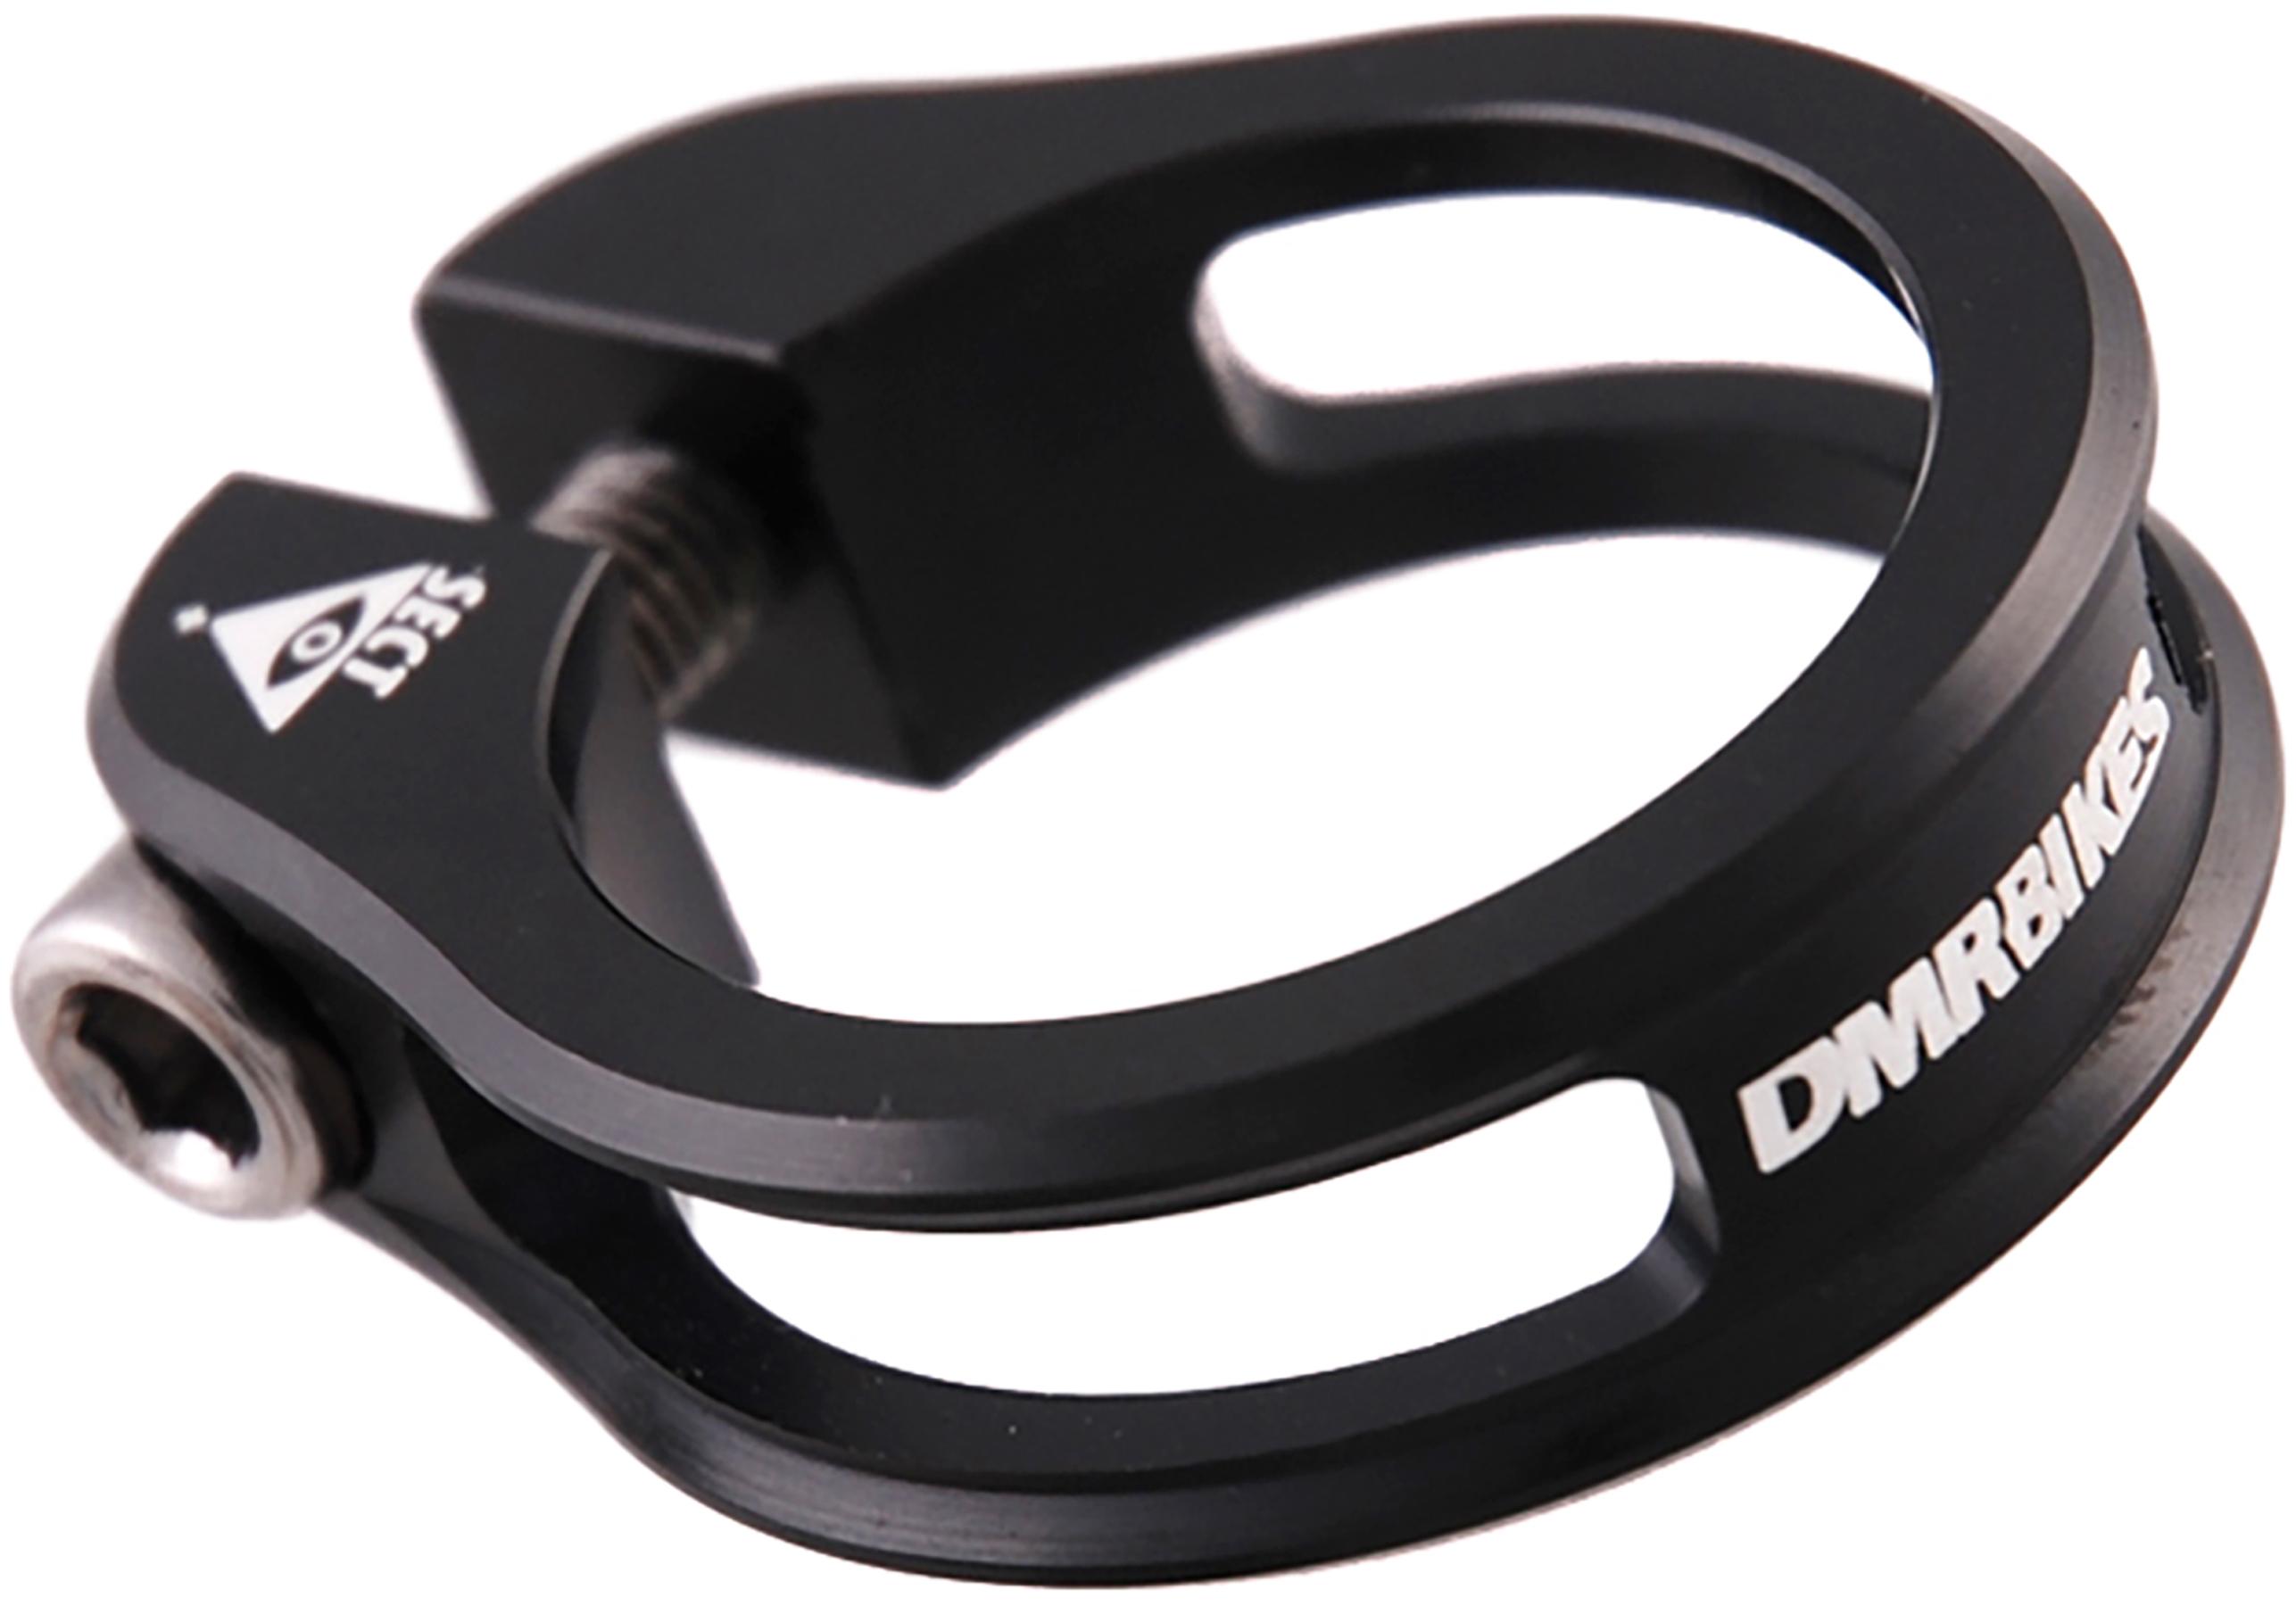 Dmr Sect Seatpost Clamp - Black